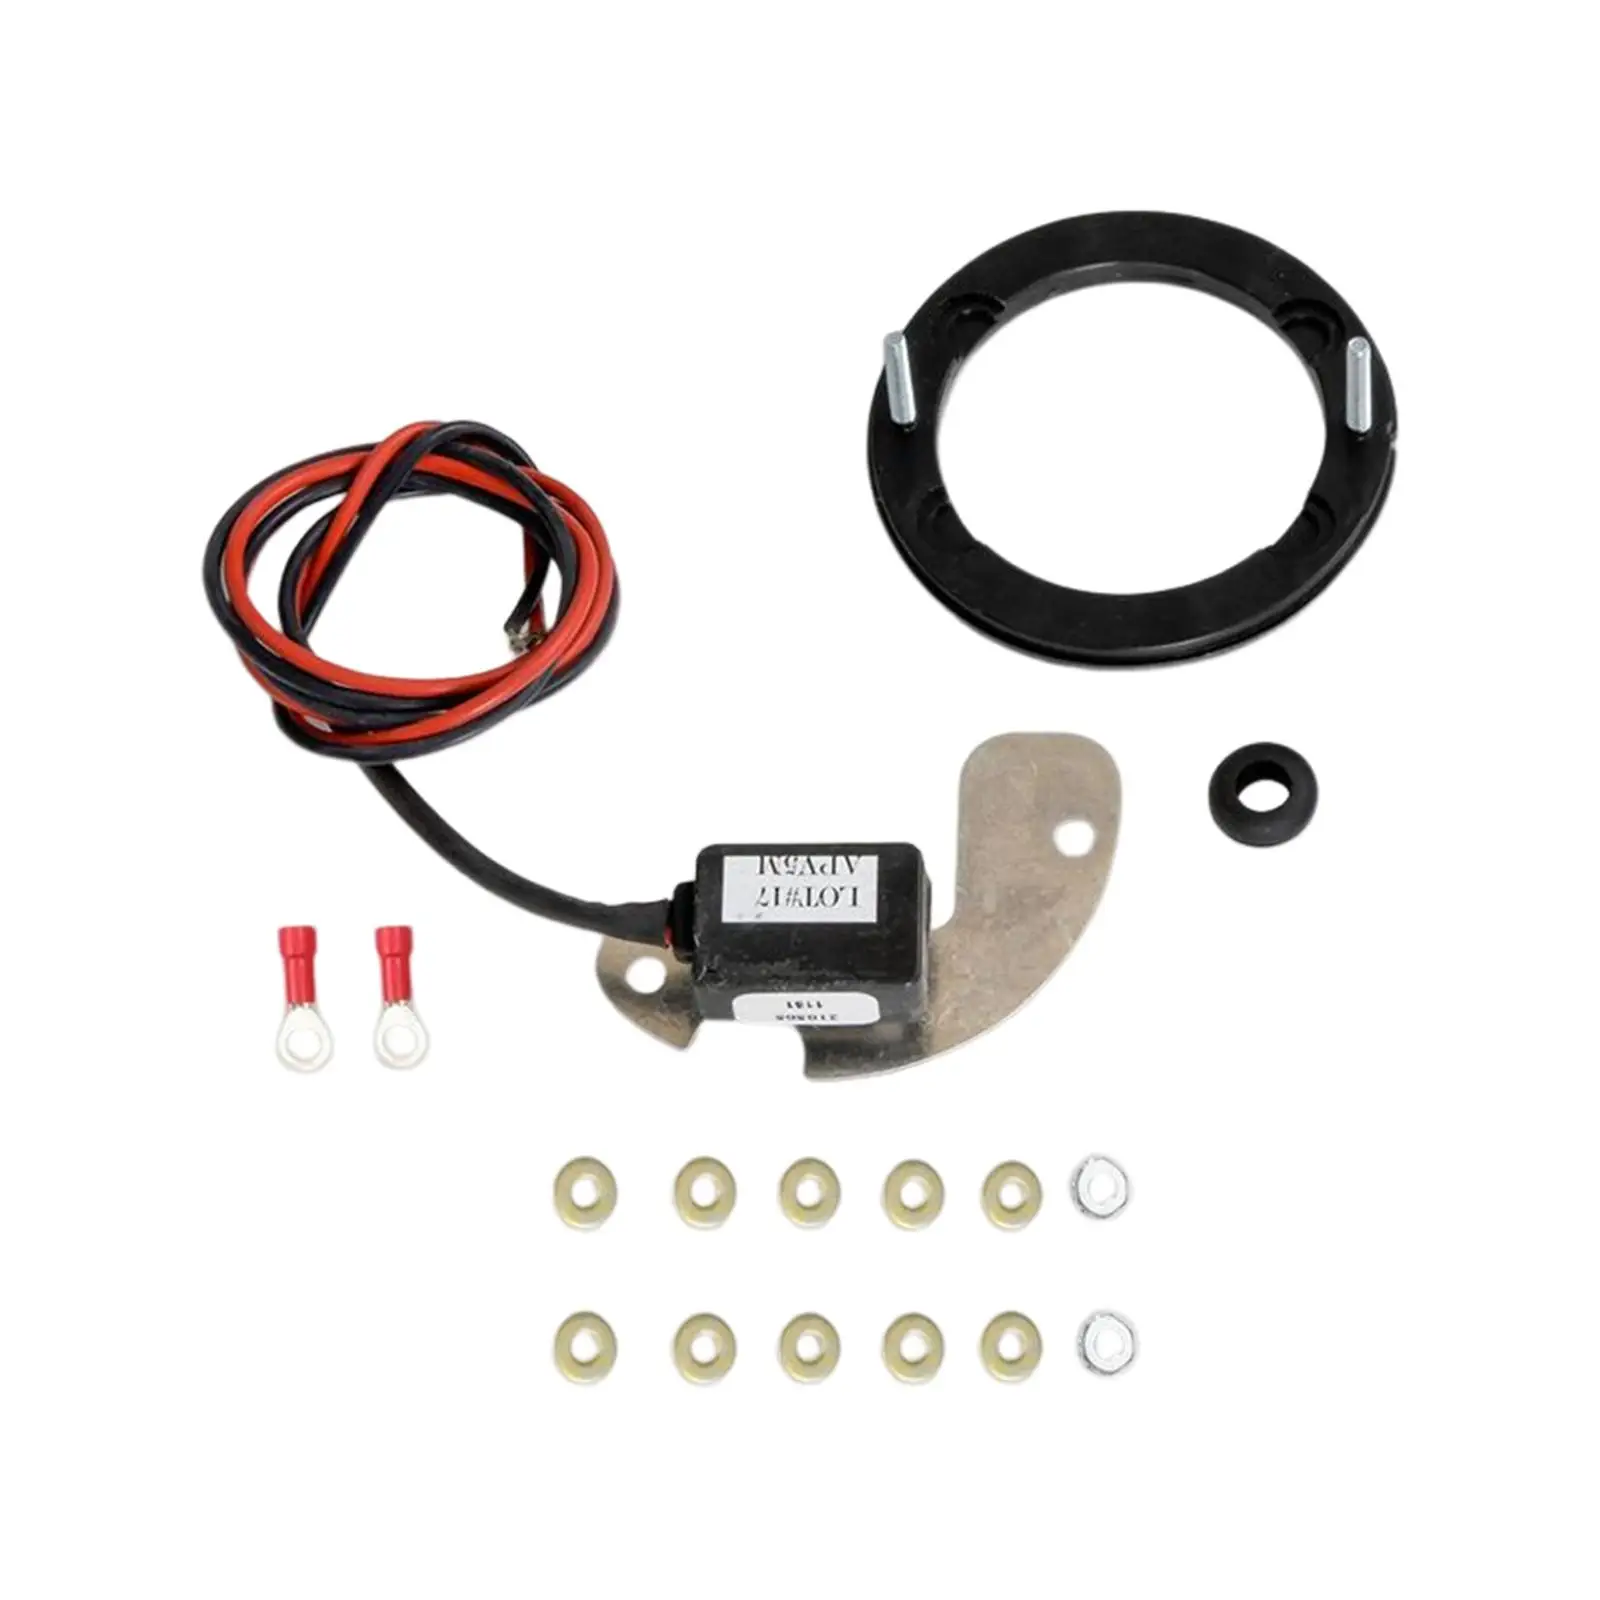 Ignition Module Conversion Set for Delco 8 Cylinder 1956-1974 Upgrade